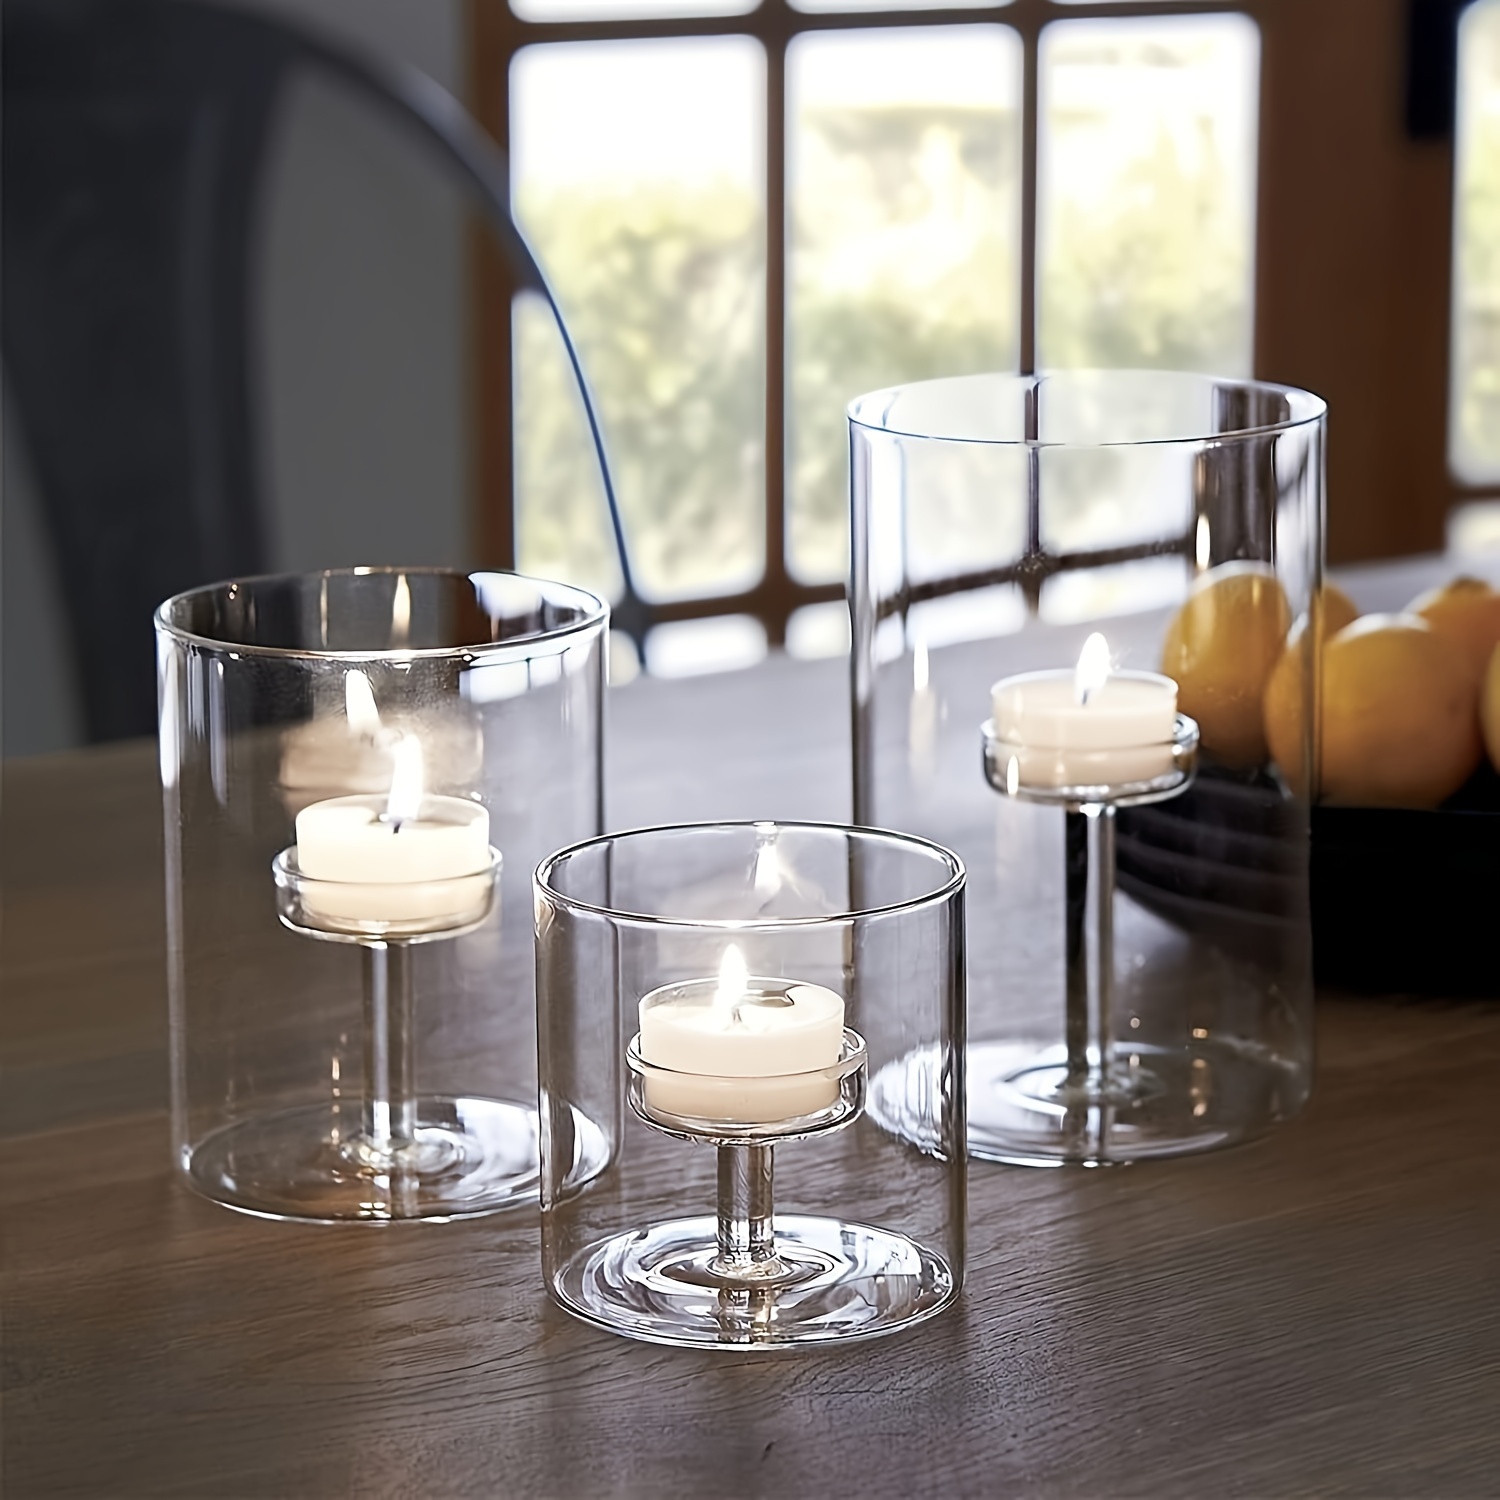 

Set, Hurricane Glass Tea Light Candle Holders Pillar Candles Clear Votive Candle Holders For Wedding Table Centerpieces Party Home Living Room Decoration